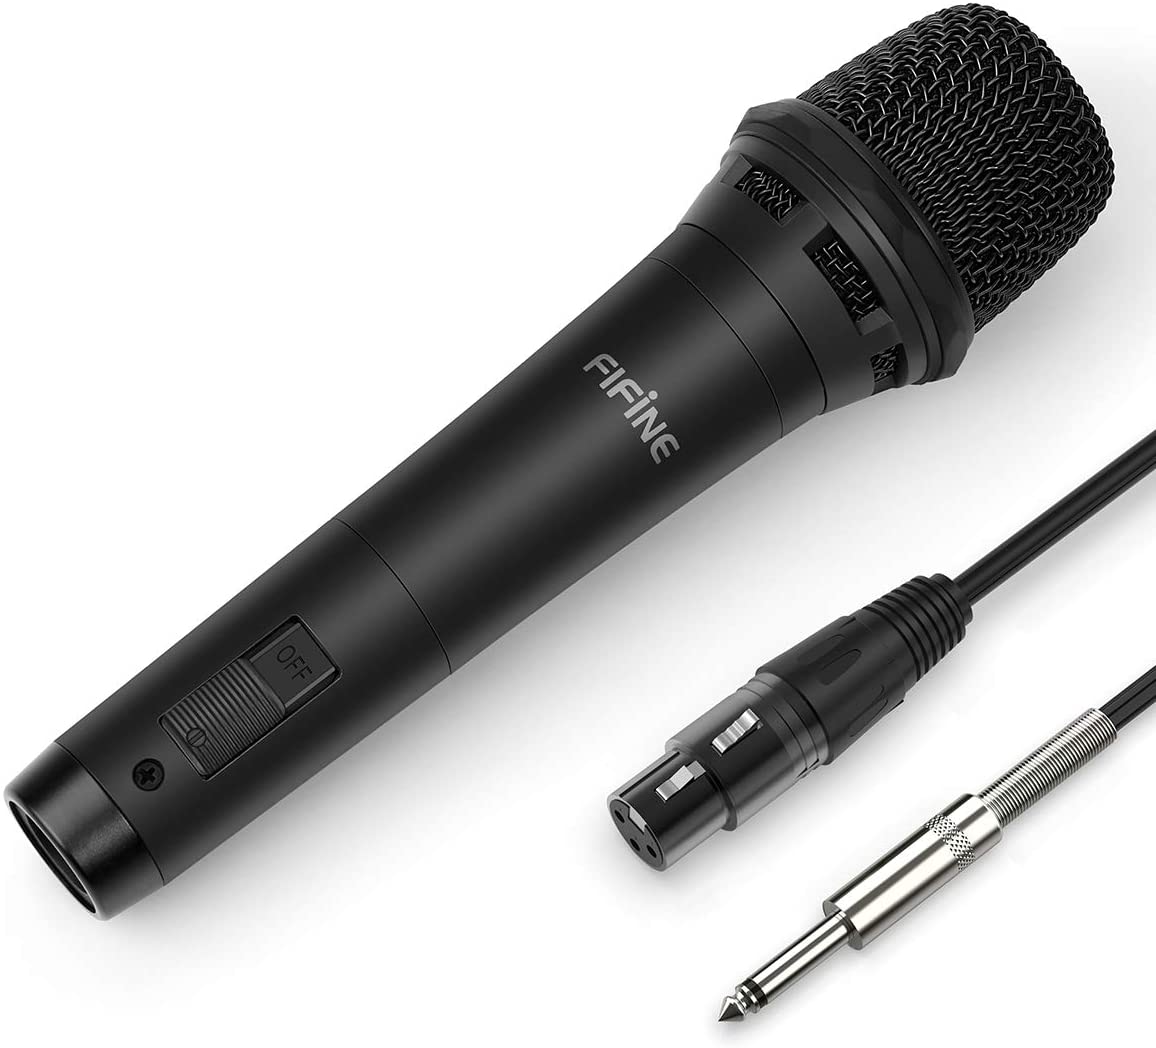 FIFINE K8 Dynamic Vocal Microphone Cardioid Handheld Microphone with On and Off Switch for Karaoke, Live Vocal, Speech etc Includes 19ft XLR to Quarter Inch Cable